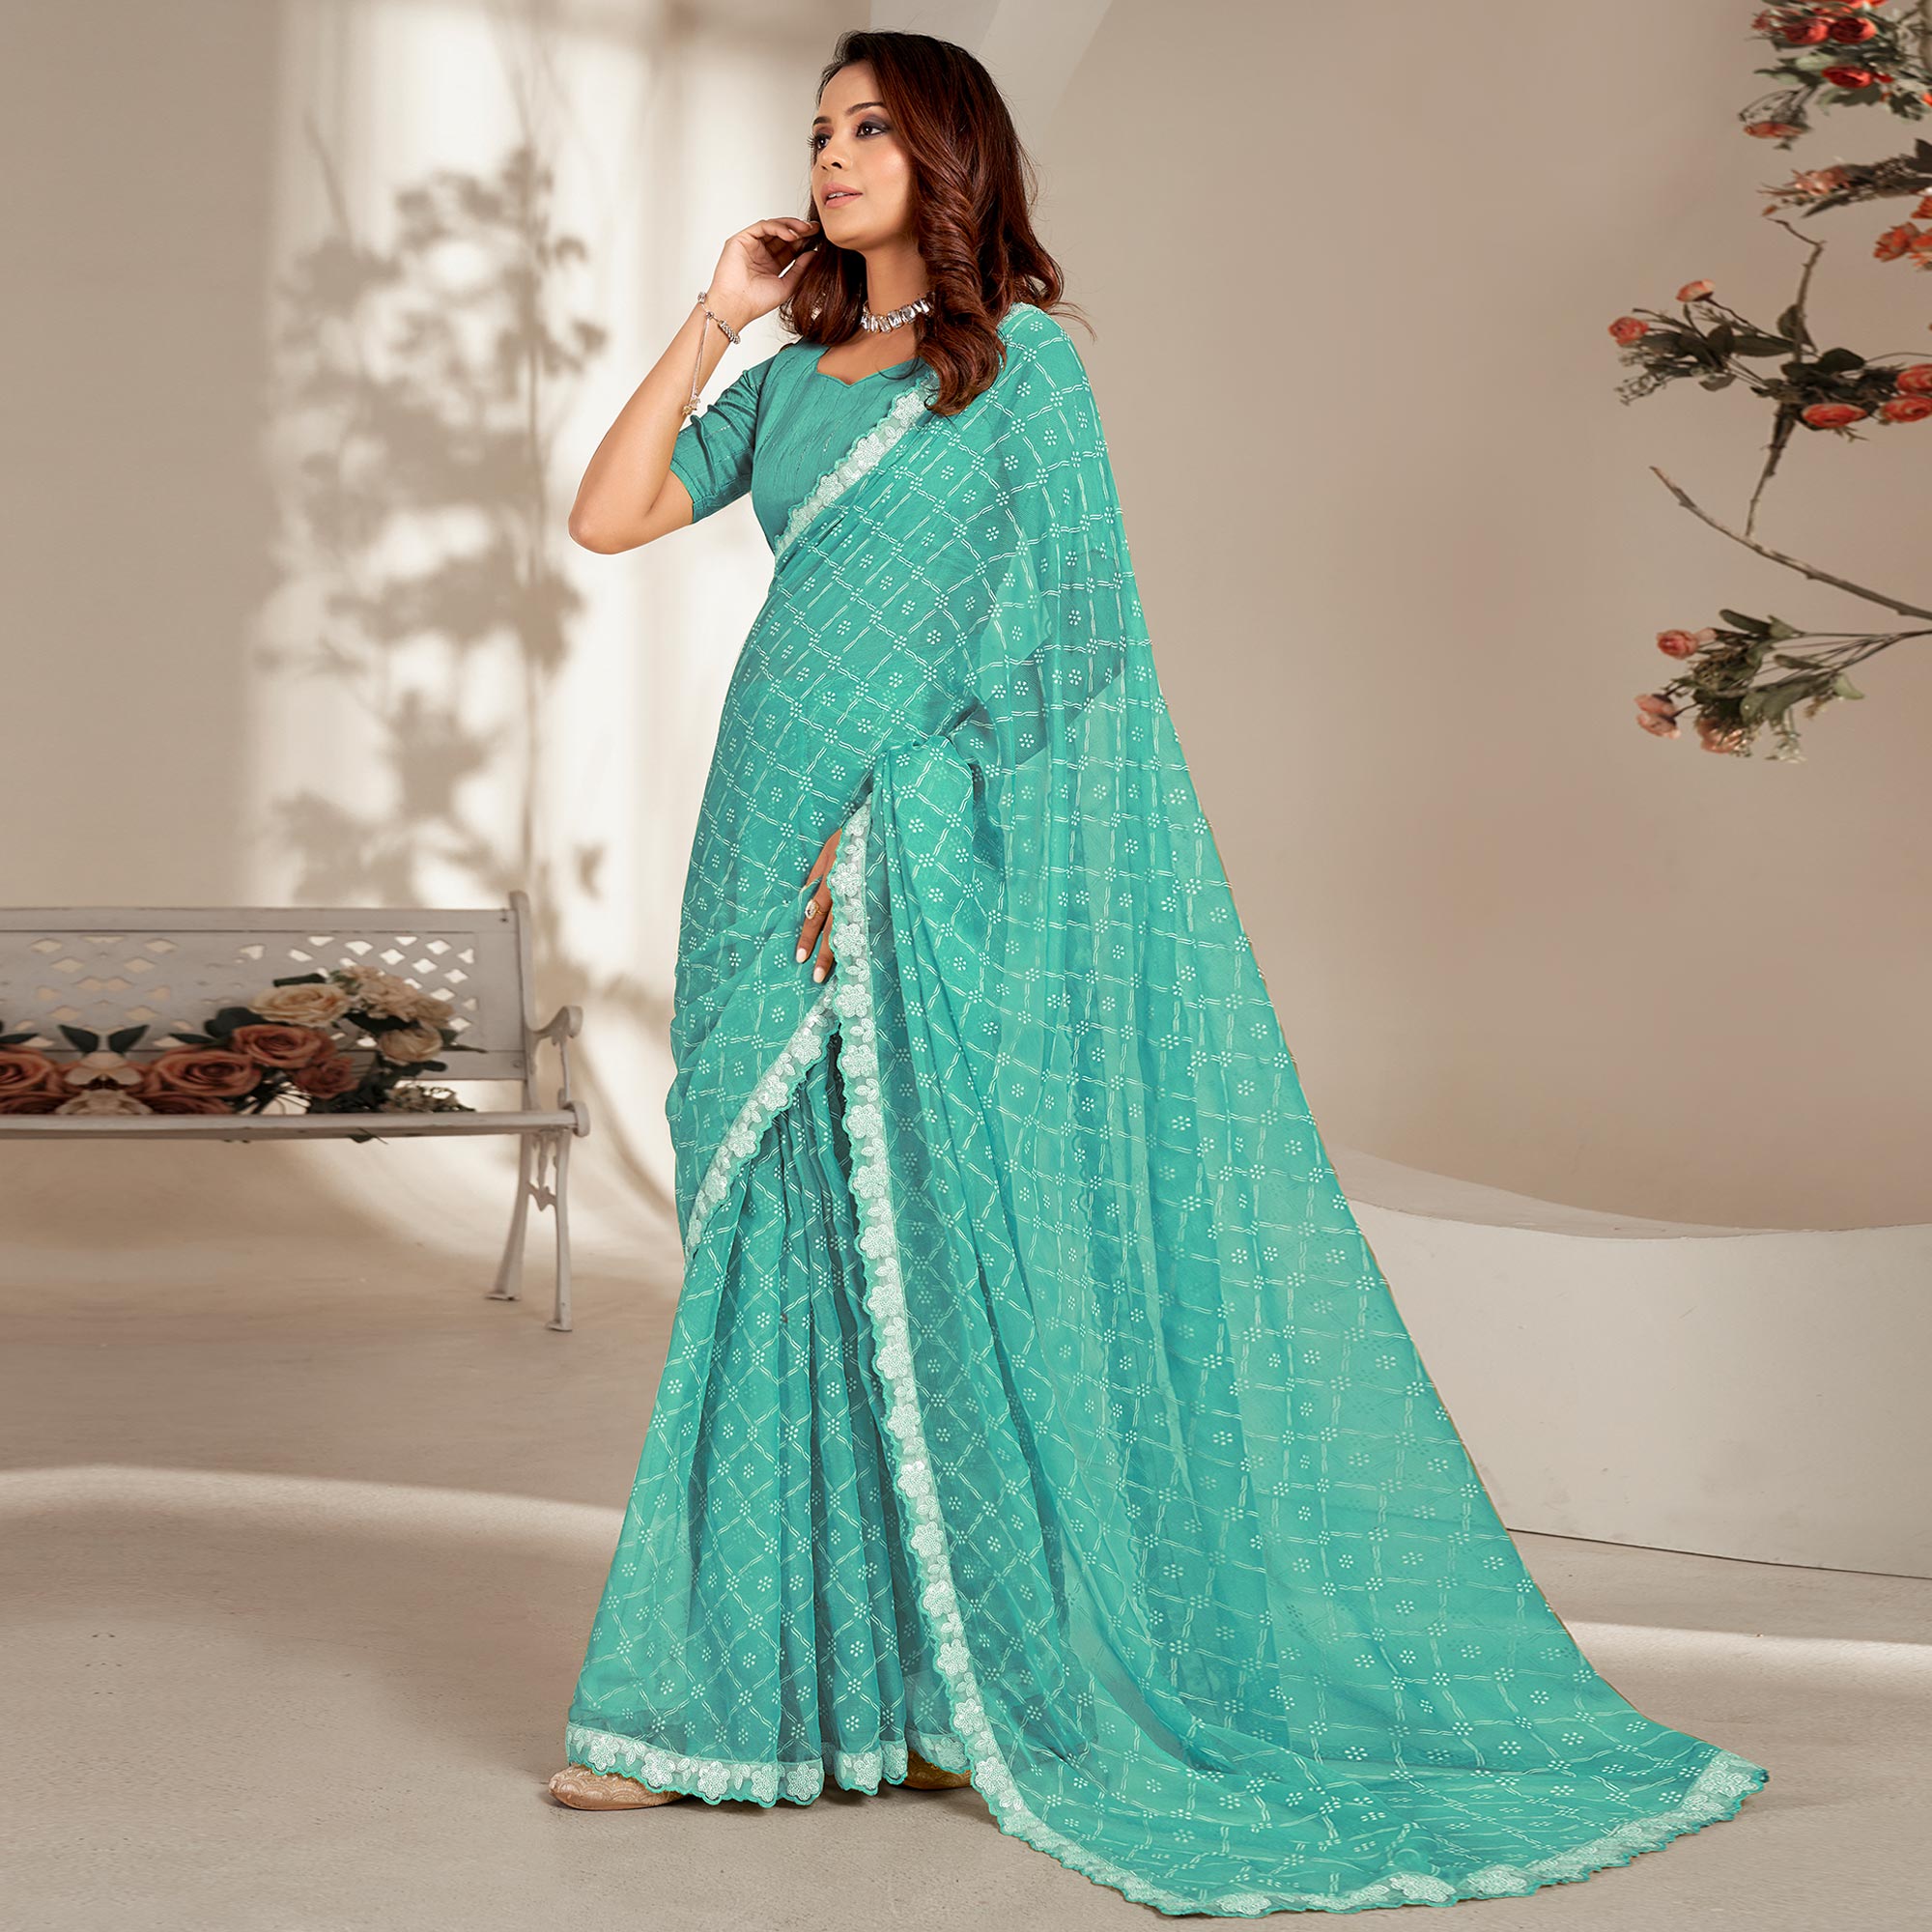 Turquoise Floral Printed Chiffon Saree With Embroidered Border